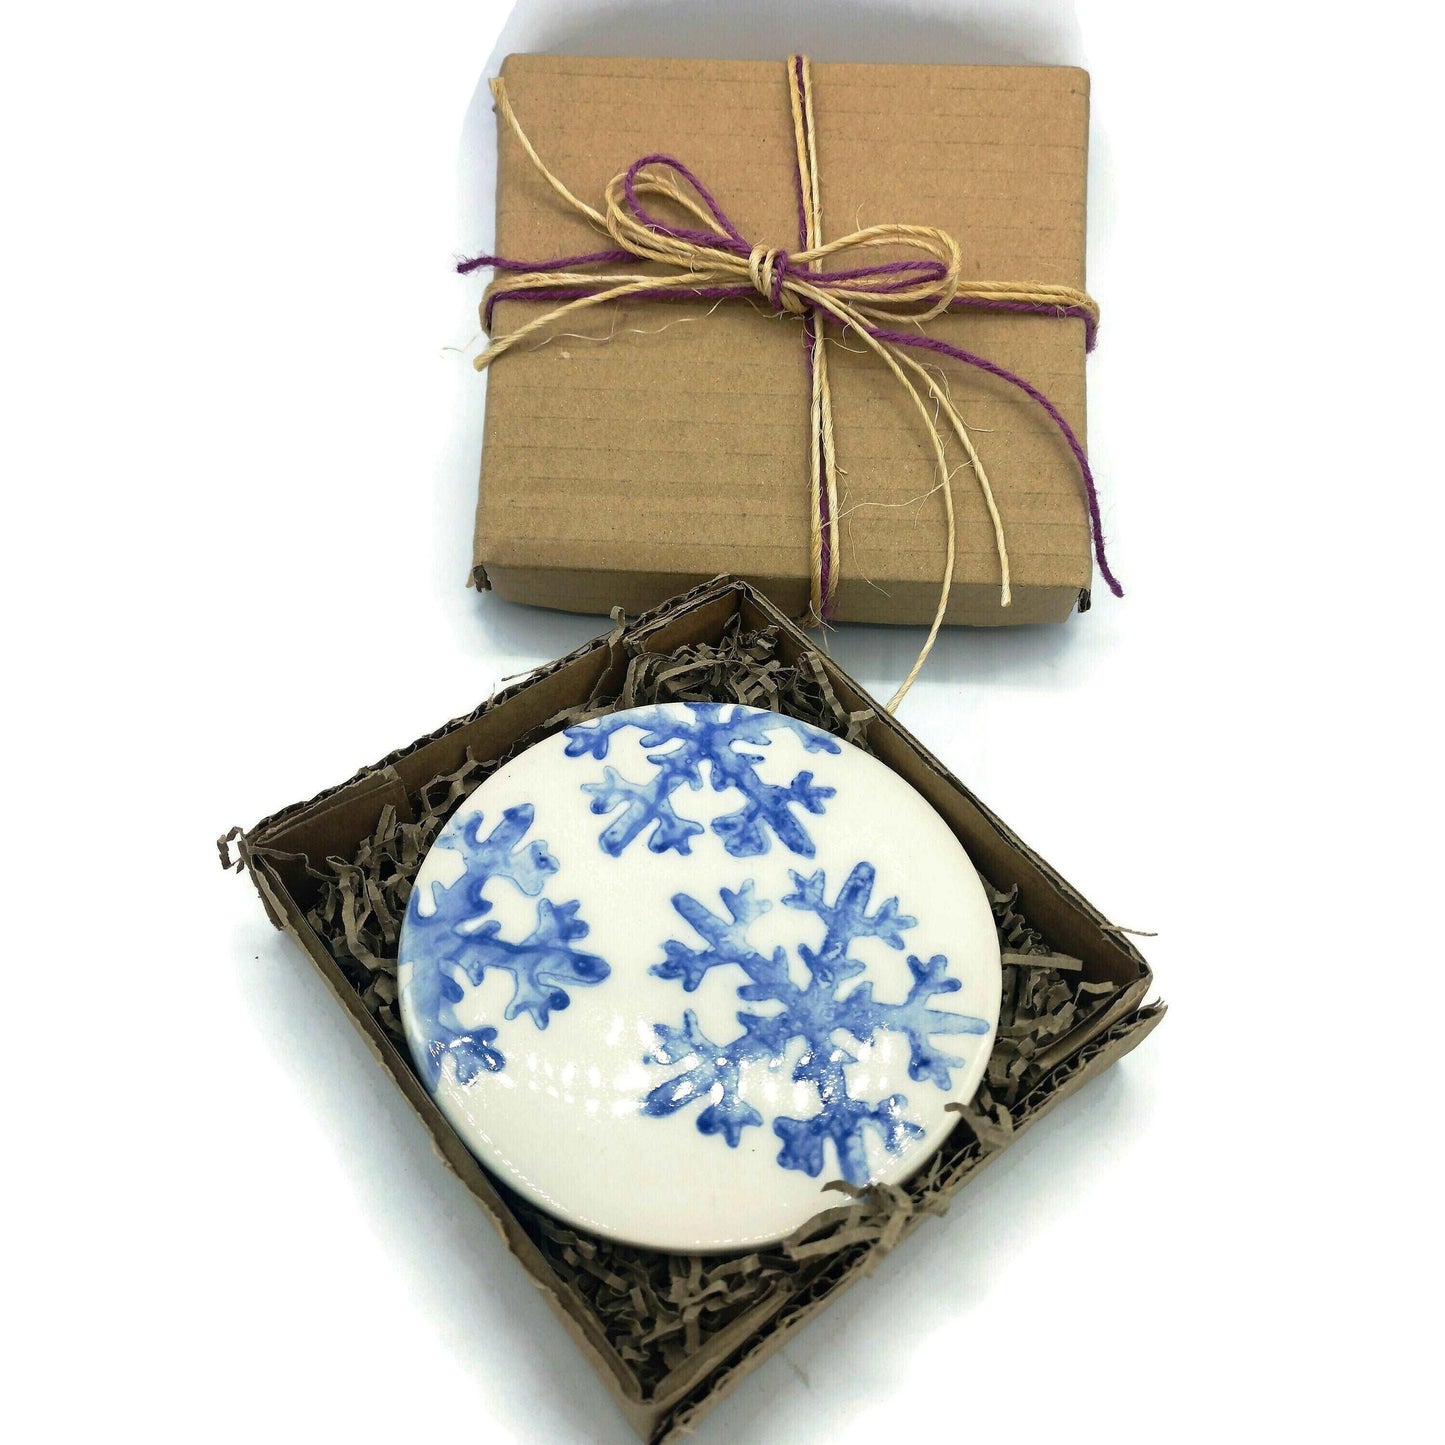 1Pc Handmade Ceramic Coaster Round with Hand-Painted Blue Snowflakes and Cork Backing - Durable and Stylish Christmas Home Decor Accessory